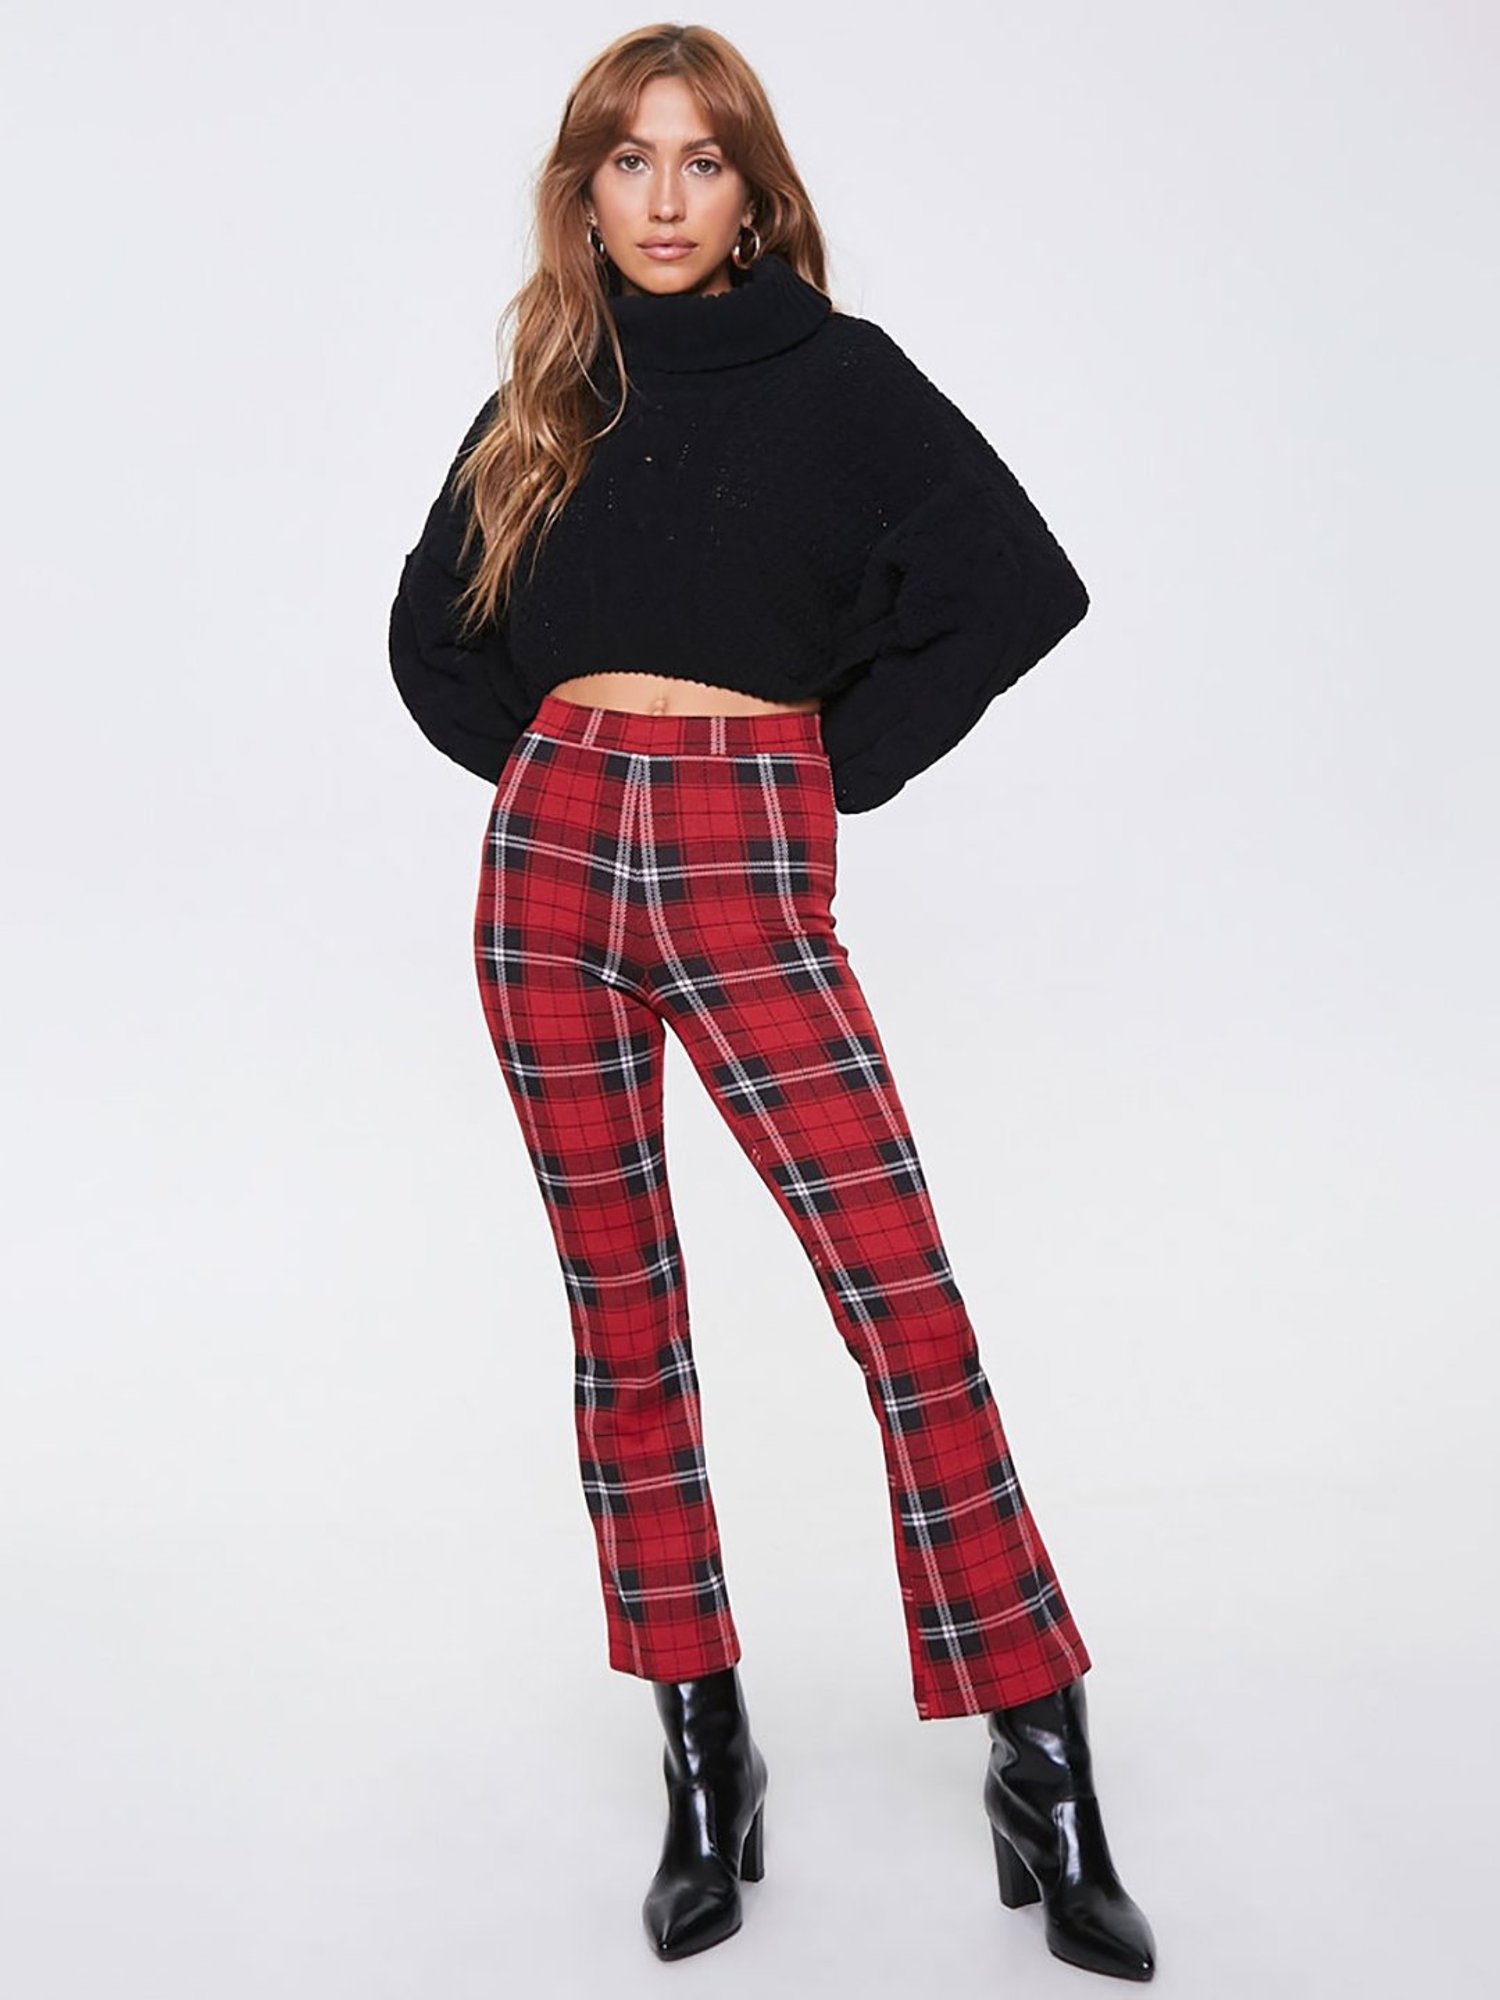 How to Wear the Checkered Pants Trend and Where to Shop Them  POPSUGAR  Fashion